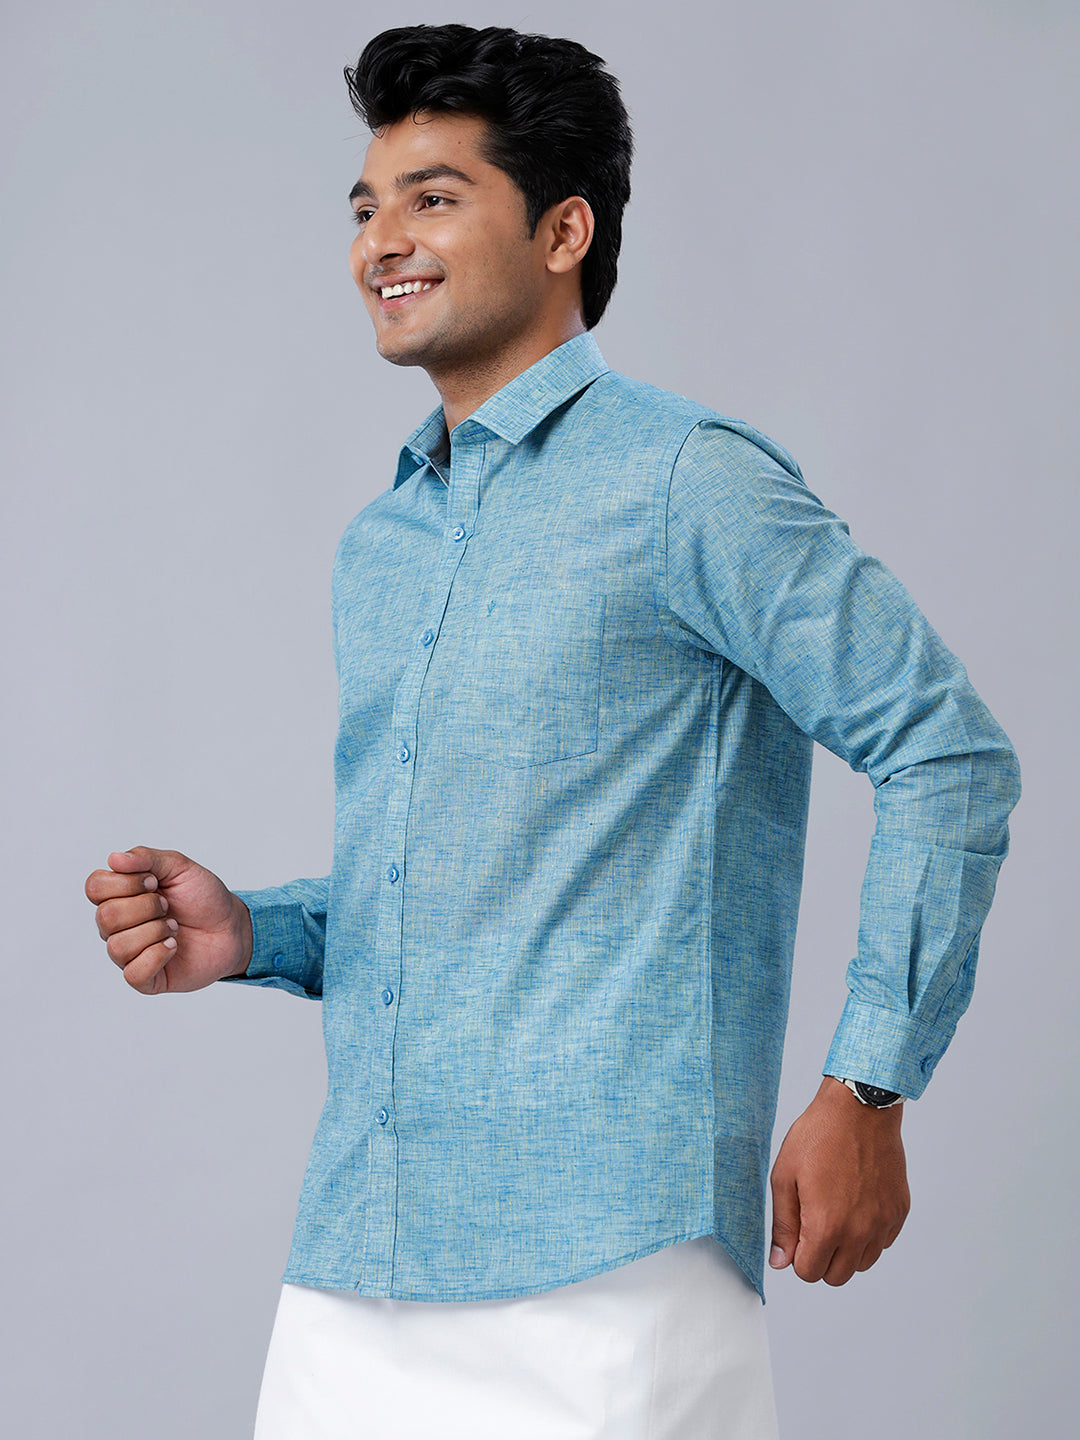 Mens Formal Shirt Full Sleeves Blue T39 TO5-Side view